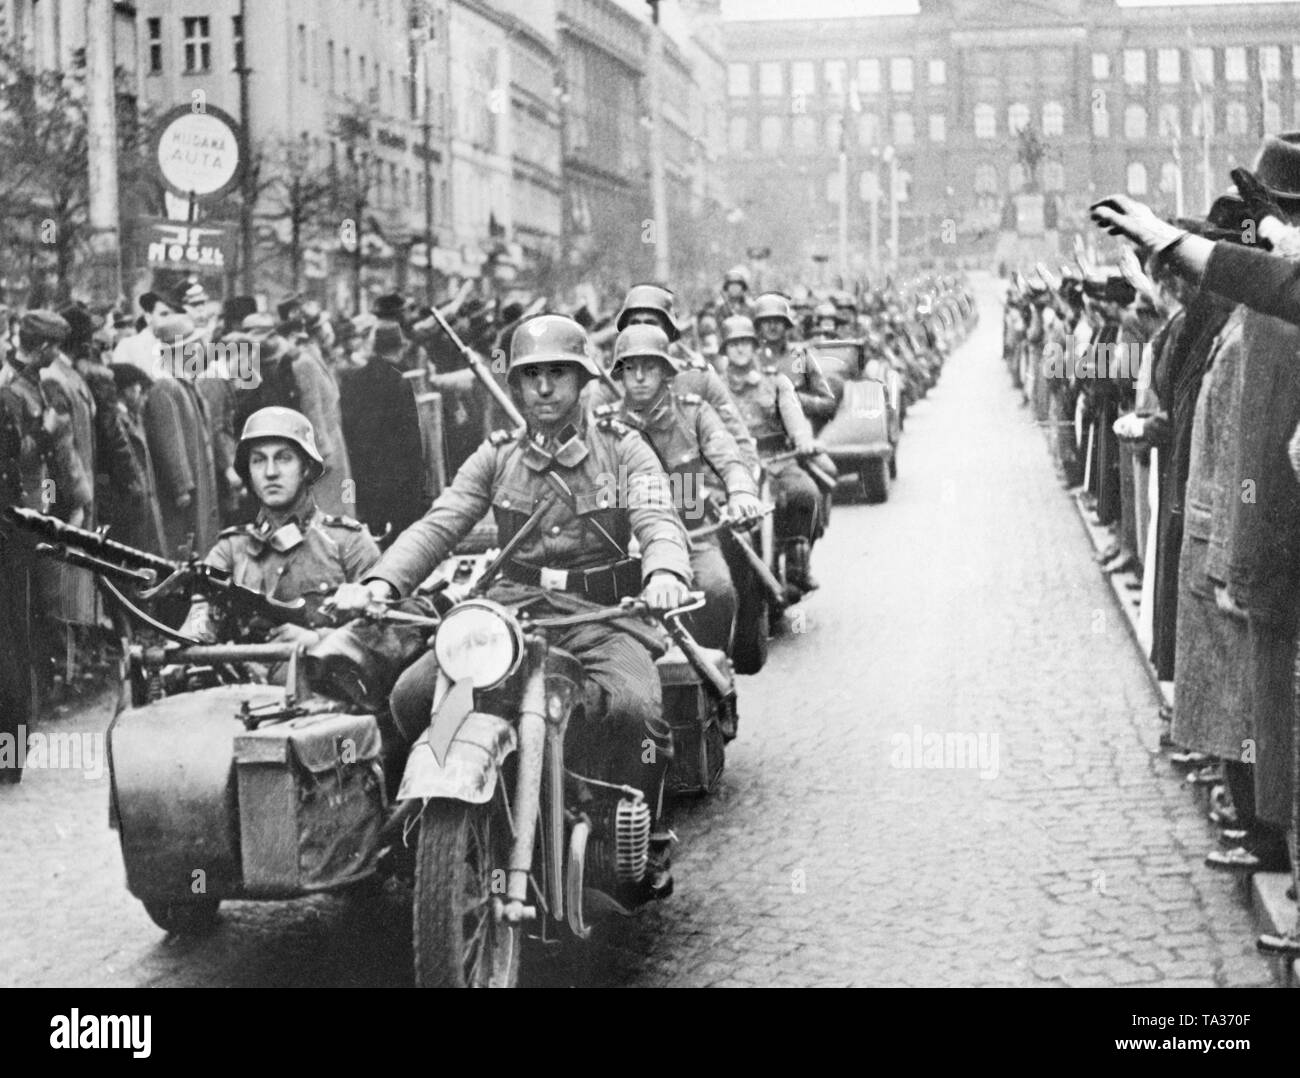 The SS Leibstandarte (Guard of Corps) returns to Prague after its deployment on the Eastern Front. The soldiers drive with motorcycles and sidecars across Wenceslas Square. Hitler starts World War II by attacking Poland in September. Stock Photo